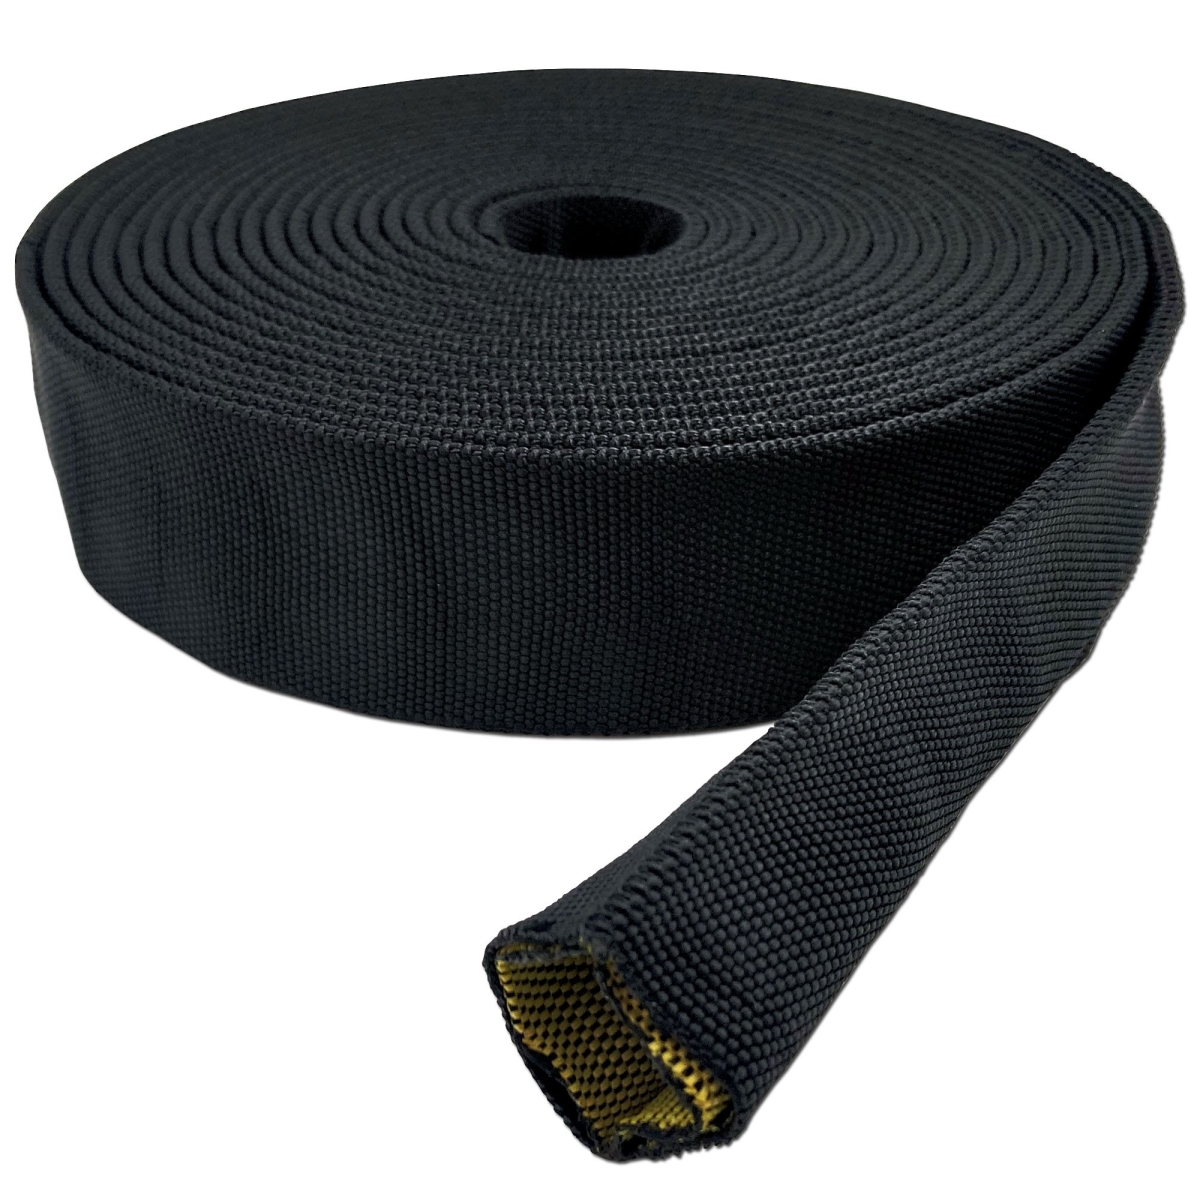 Picture of Electriduct BS-J-BURST-075-25-BK 0.75 in. x 25 ft. Burst Protection Multifilament Nylon Braided Sleeving - Black